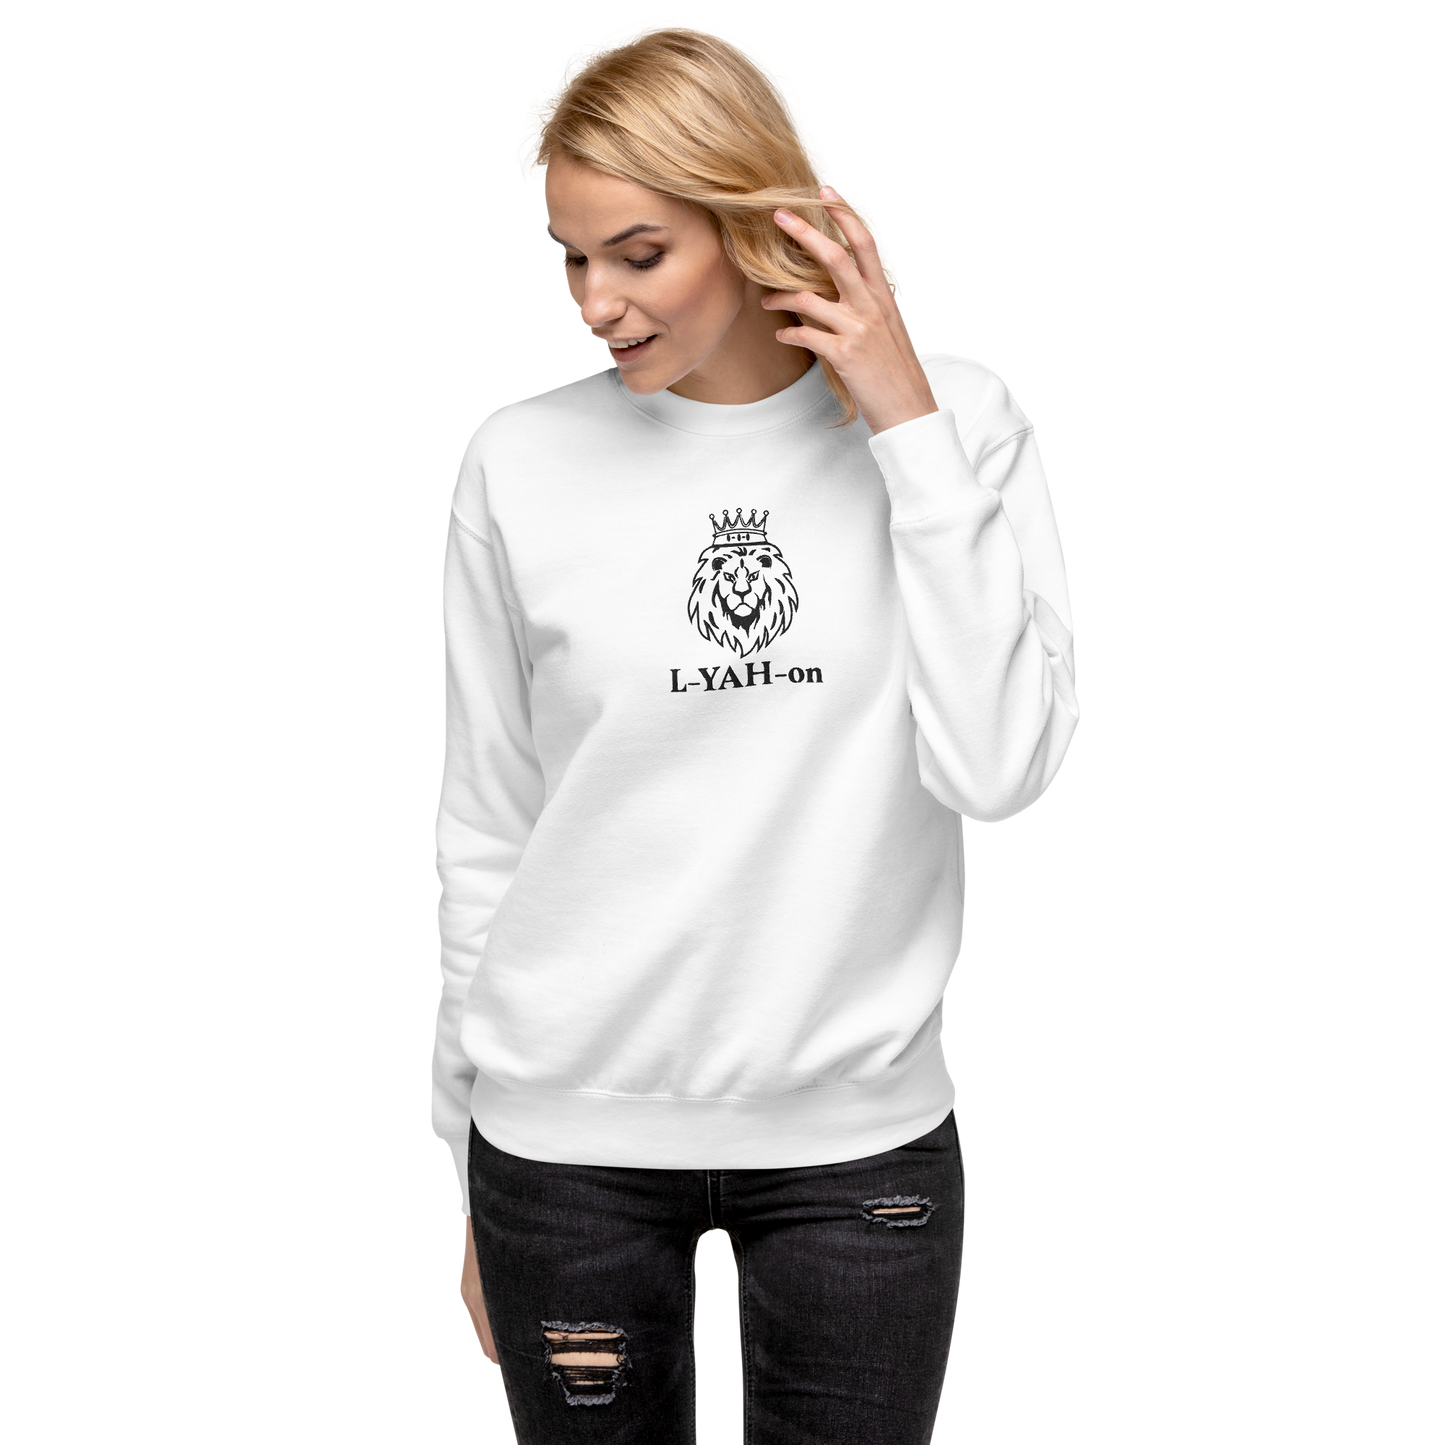 Classic L-YAH-on Embroidered Sweatshirt